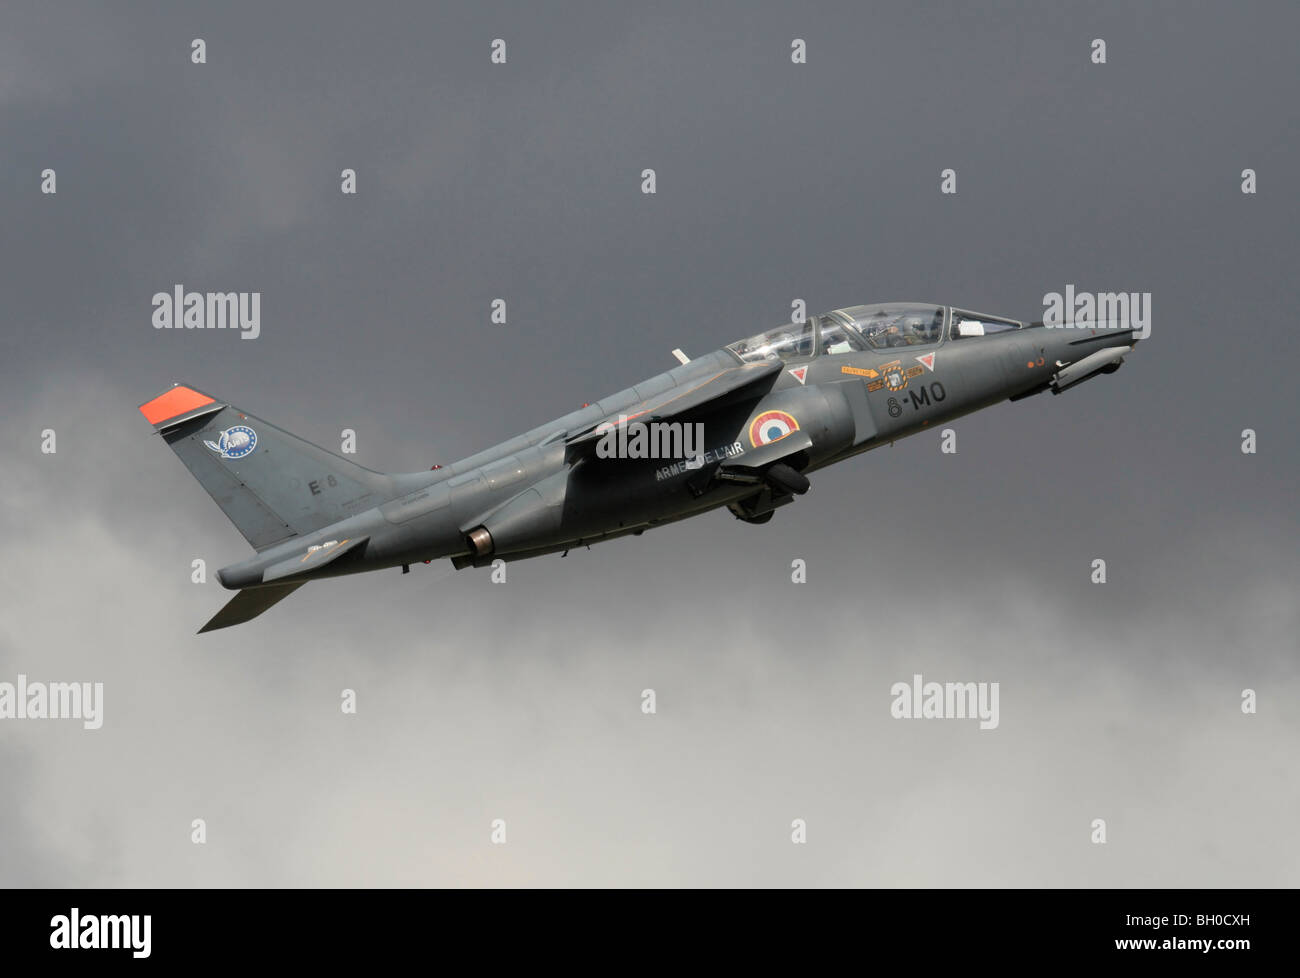 Military pilot training. French Air Force Alpha Jet two-seat trainer plane flying on takeoff. Side view. Stock Photo